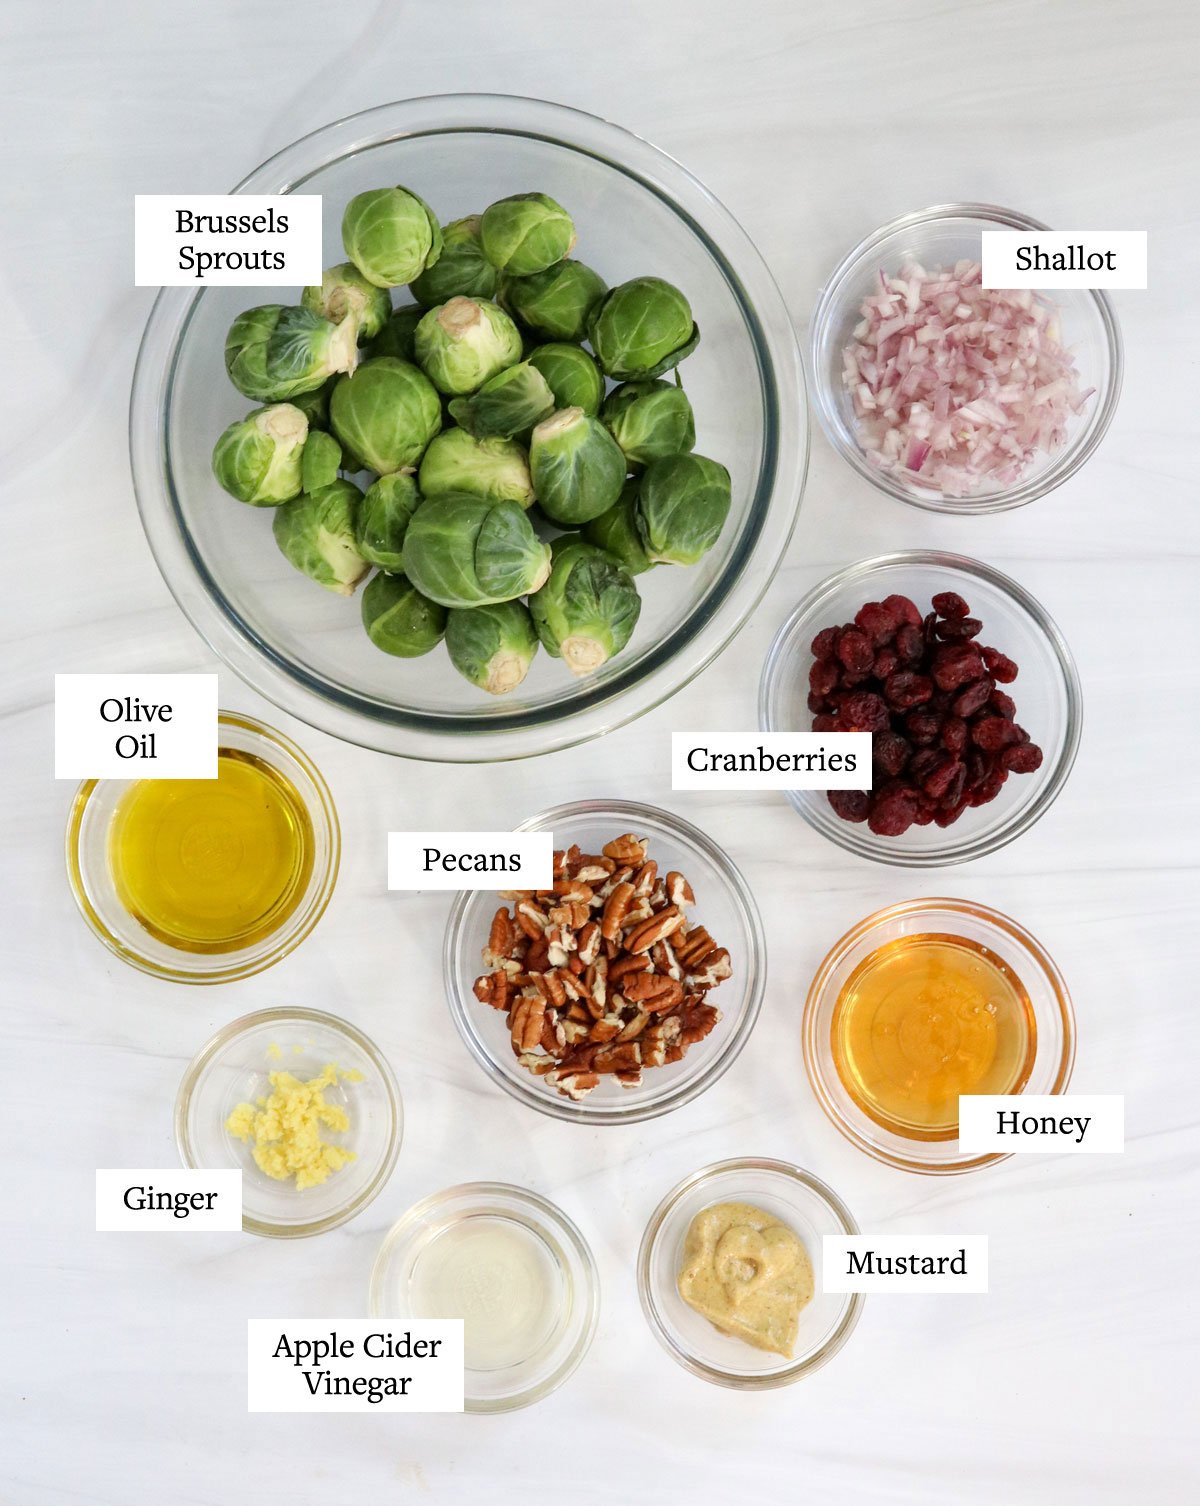 brussels sprouts salad ingredients in glass bowls on white table